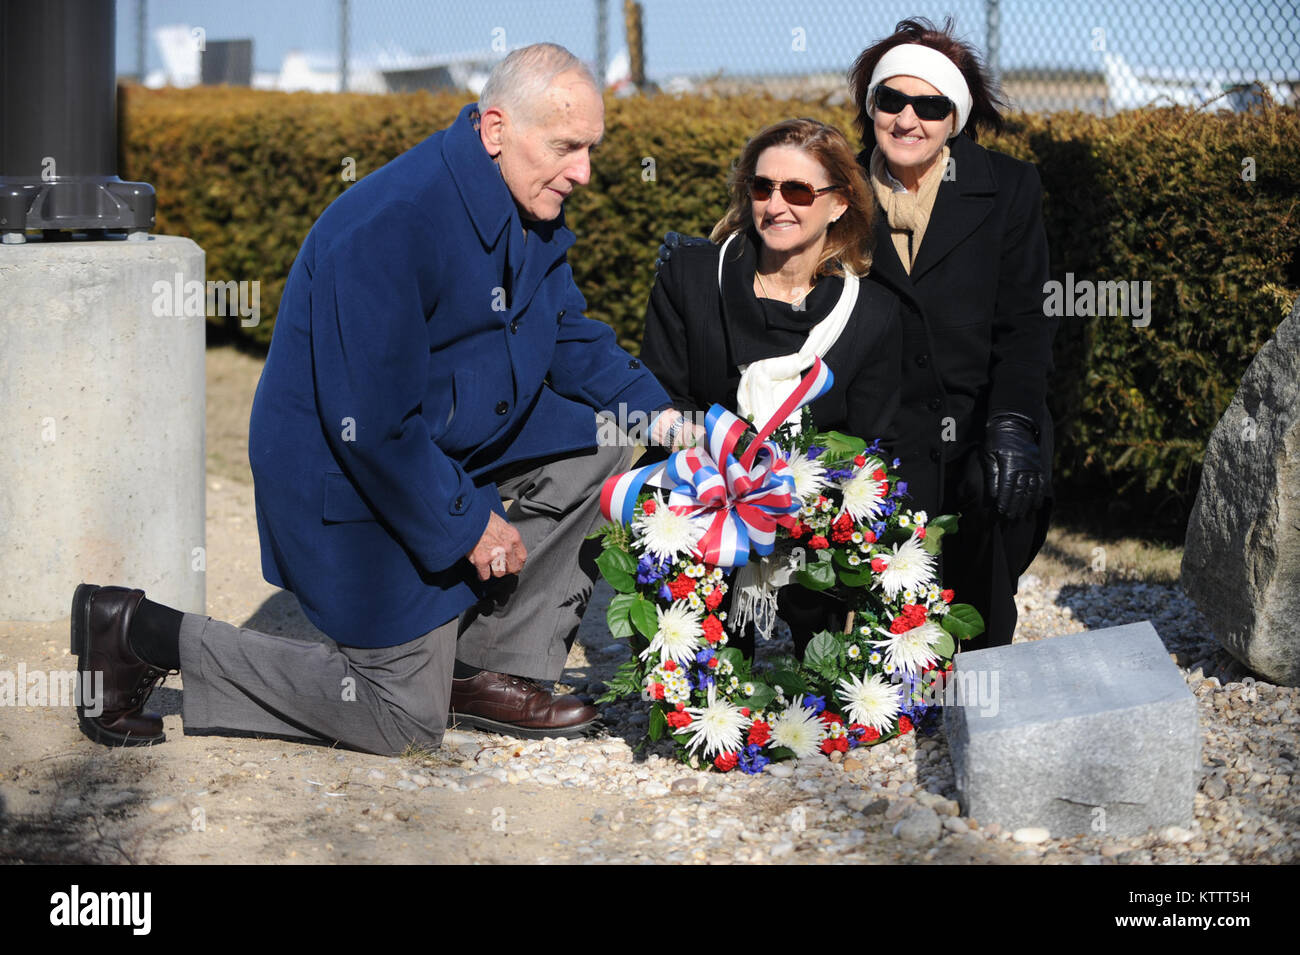 WESTHAMPTON BEACH, N.Y. - The Downstate New York Division of the Polish American Congress, along with friends and family, held a wreath-laying ceremony at the Francis S. Gabreski Airport in Westhampton, Long Island on Sunday on January 29th at 1:00 p.m. to honor the memory of America’s top World War II Air Ace in Europe for whom the airport is named on the 100th anniversary of his death.  (USAF/Senior Airman Christopher Muncy -released) Stock Photo